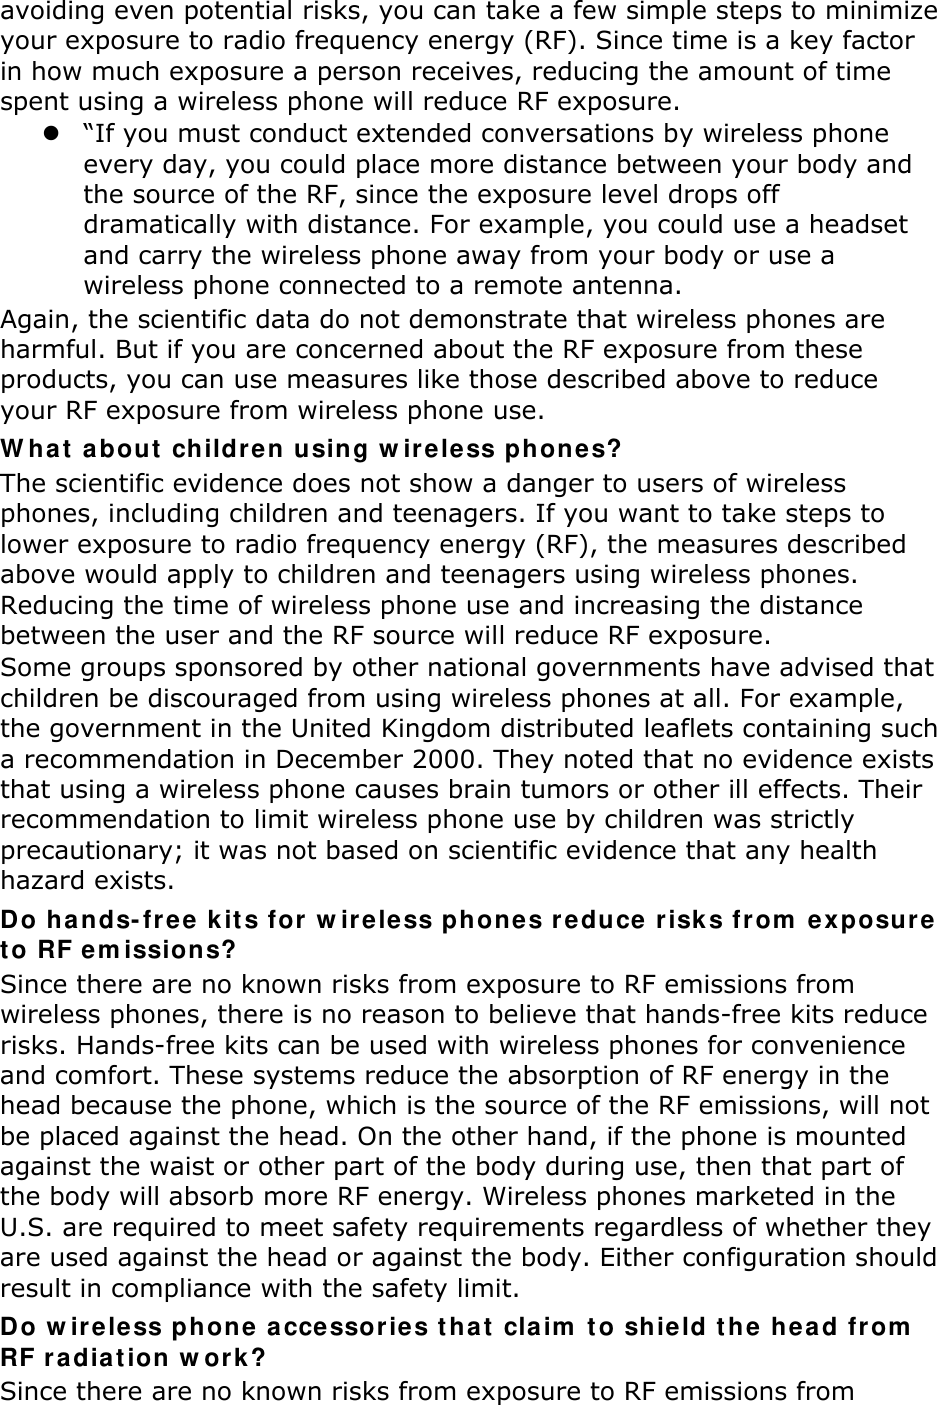 avoiding even potential risks, you can take a few simple steps to minimize your exposure to radio frequency energy (RF). Since time is a key factor in how much exposure a person receives, reducing the amount of time spent using a wireless phone will reduce RF exposure.  “If you must conduct extended conversations by wireless phone every day, you could place more distance between your body and the source of the RF, since the exposure level drops off dramatically with distance. For example, you could use a headset and carry the wireless phone away from your body or use a wireless phone connected to a remote antenna. Again, the scientific data do not demonstrate that wireless phones are harmful. But if you are concerned about the RF exposure from these products, you can use measures like those described above to reduce your RF exposure from wireless phone use. W ha t  about  children using w ir e less phone s? The scientific evidence does not show a danger to users of wireless phones, including children and teenagers. If you want to take steps to lower exposure to radio frequency energy (RF), the measures described above would apply to children and teenagers using wireless phones. Reducing the time of wireless phone use and increasing the distance between the user and the RF source will reduce RF exposure. Some groups sponsored by other national governments have advised that children be discouraged from using wireless phones at all. For example, the government in the United Kingdom distributed leaflets containing such a recommendation in December 2000. They noted that no evidence exists that using a wireless phone causes brain tumors or other ill effects. Their recommendation to limit wireless phone use by children was strictly precautionary; it was not based on scientific evidence that any health hazard exists.   Do ha nds-free k its for w ir eless ph on es r e du ce r isk s fr om  ex posur e  t o RF em issions? Since there are no known risks from exposure to RF emissions from wireless phones, there is no reason to believe that hands-free kits reduce risks. Hands-free kits can be used with wireless phones for convenience and comfort. These systems reduce the absorption of RF energy in the head because the phone, which is the source of the RF emissions, will not be placed against the head. On the other hand, if the phone is mounted against the waist or other part of the body during use, then that part of the body will absorb more RF energy. Wireless phones marketed in the U.S. are required to meet safety requirements regardless of whether they are used against the head or against the body. Either configuration should result in compliance with the safety limit. Do w ire less phone a ccessor ies t ha t  cla im  t o shield t he head from  RF r a dia t ion w ork? Since there are no known risks from exposure to RF emissions from 